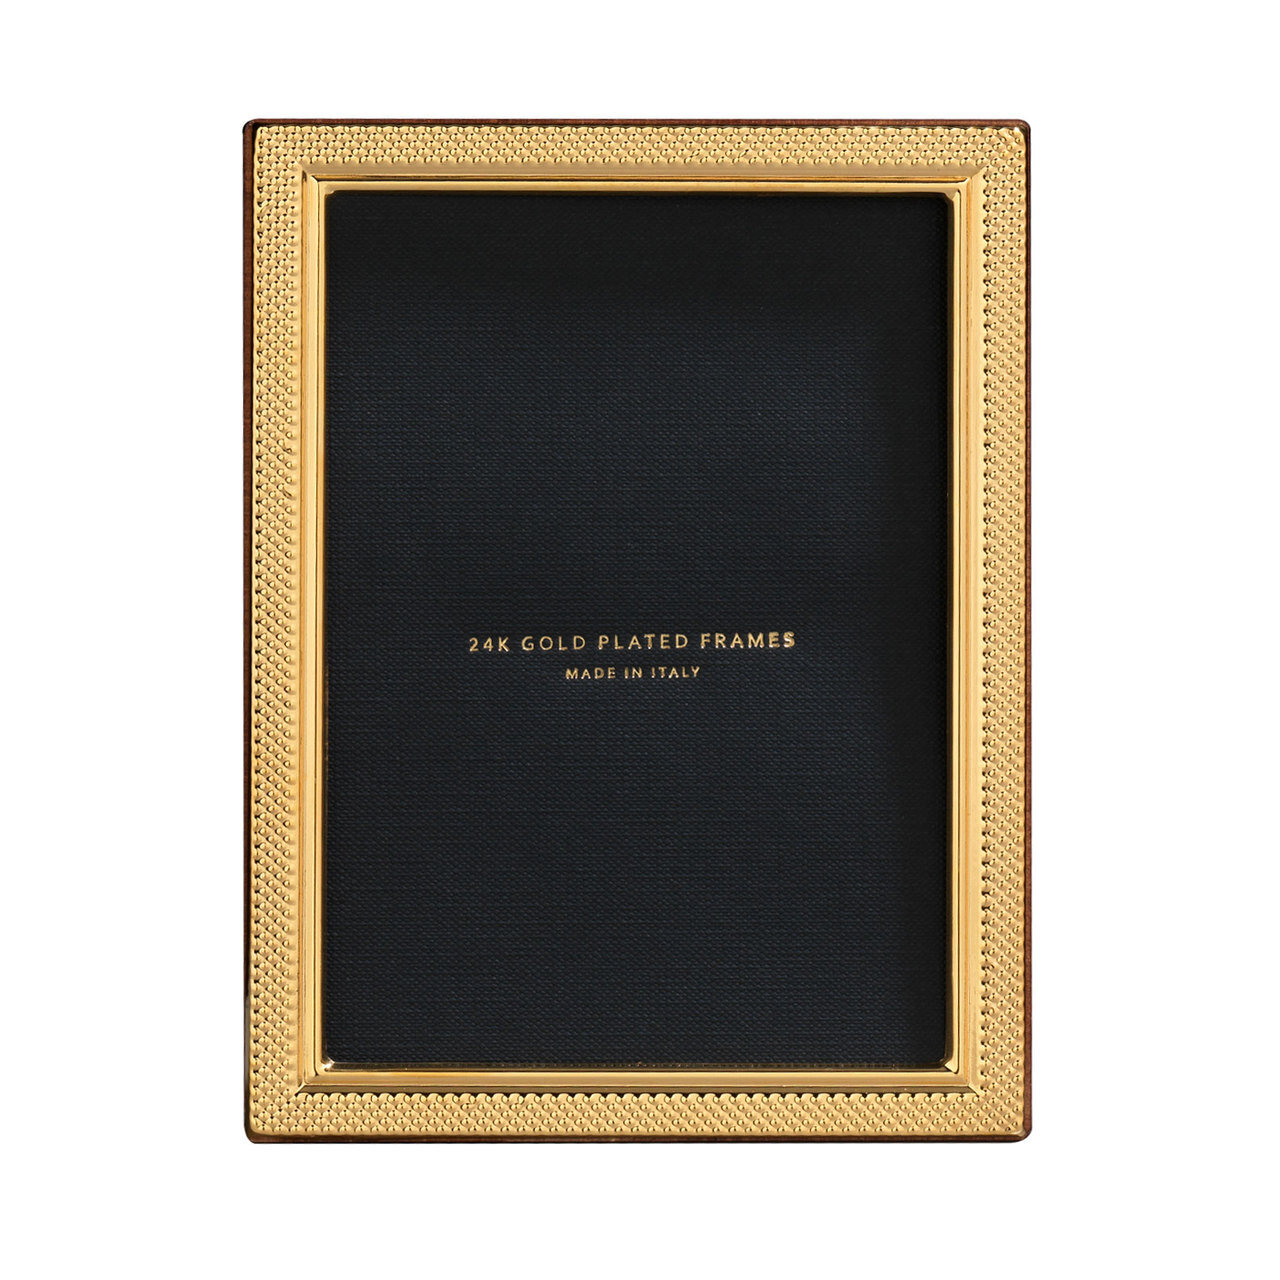 Cunill Droplets 4 x 6 Inch Picture Frame - 24k Gold Plated 0.5 Microns